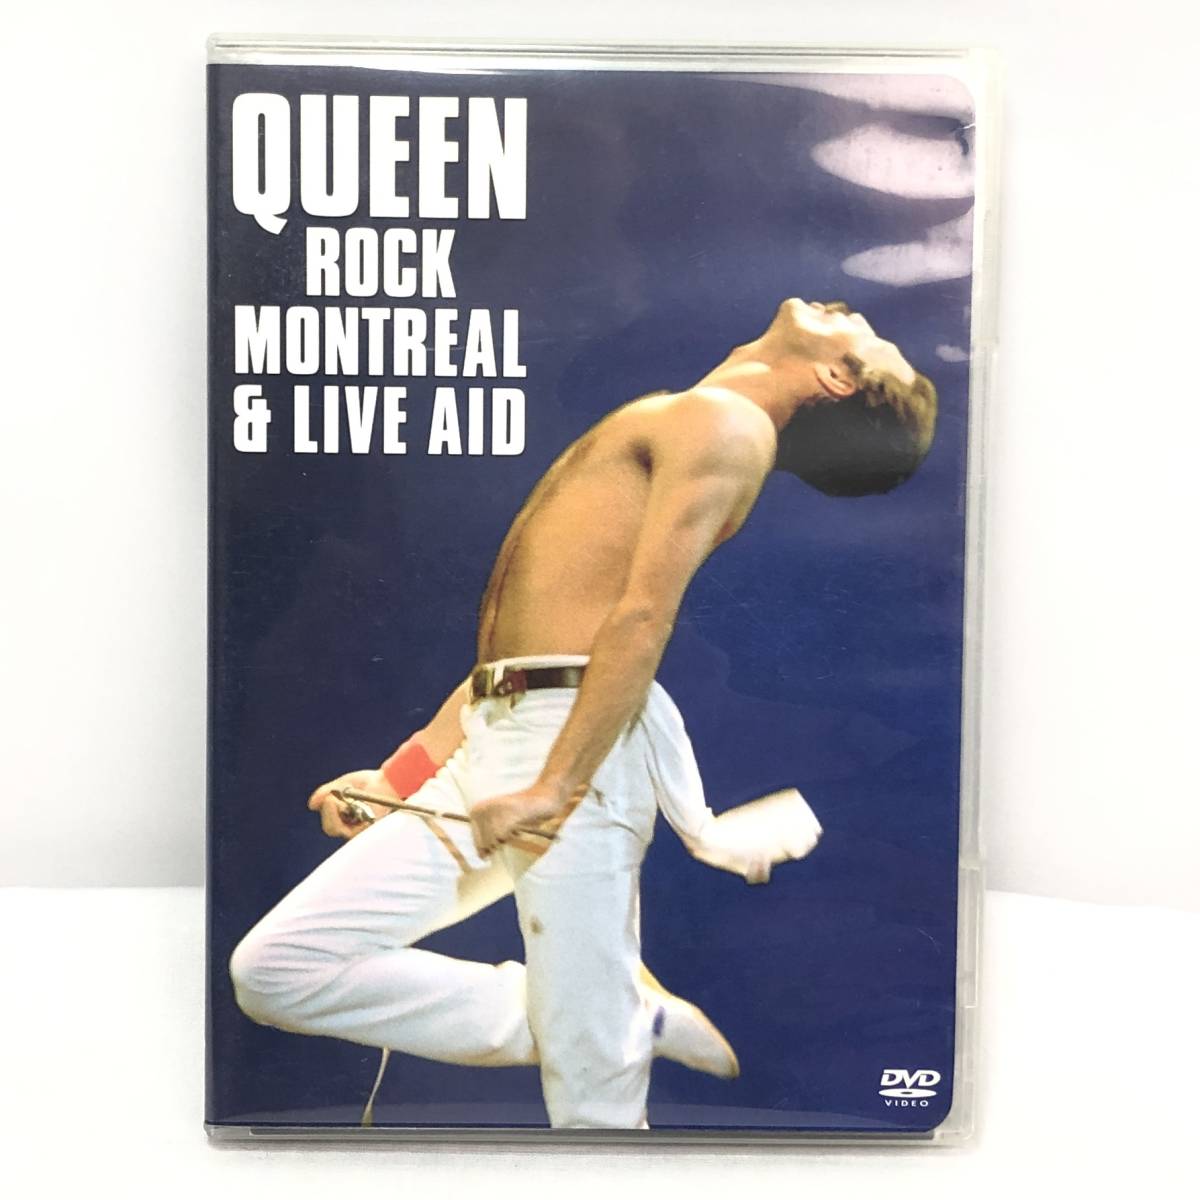 ＊[DVD]QUEEN ROCK MONTREAL & LIVE AID 2枚組 クイーン モントリオール 1981 ロック_画像1